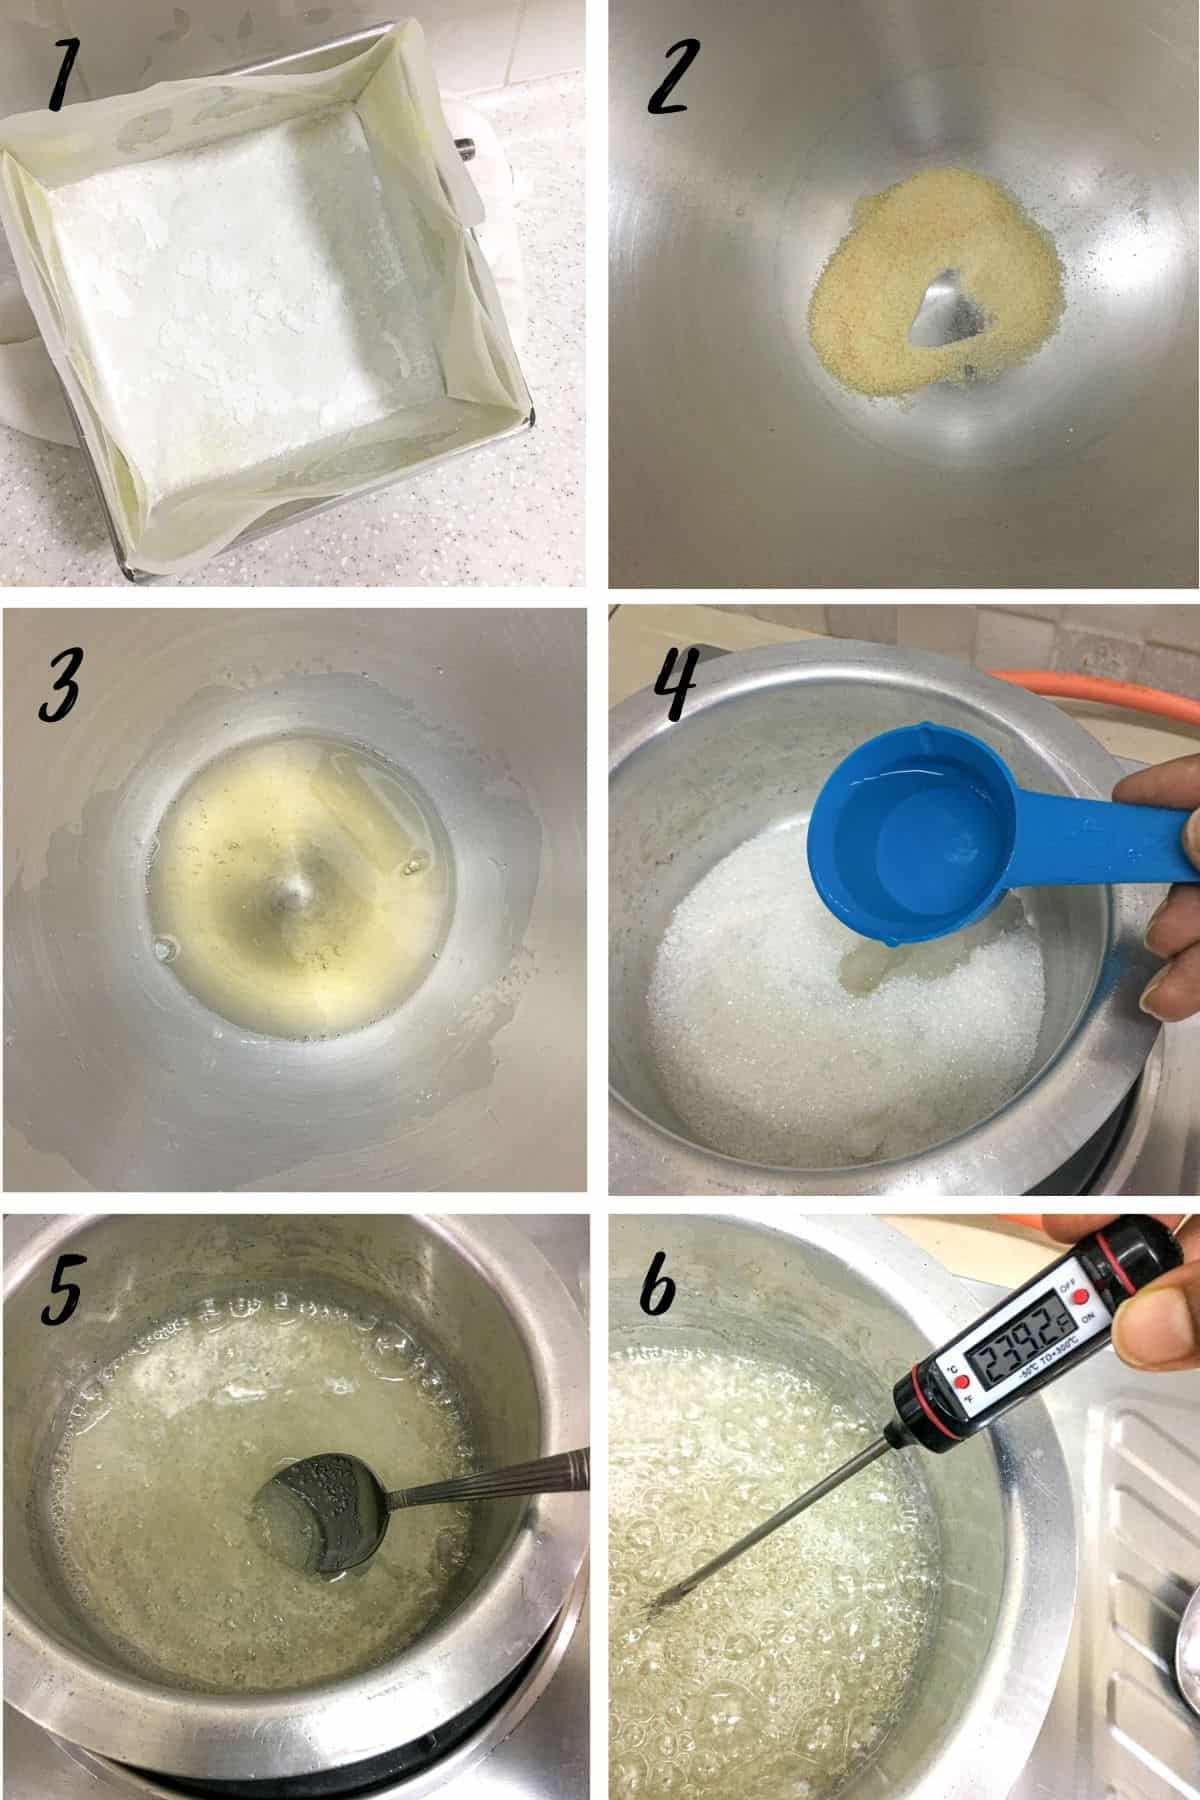 A poster of 6 images showing how to prepare a tin, how to dissolve gelatin, and how to boil sugar to a soft ball stage.